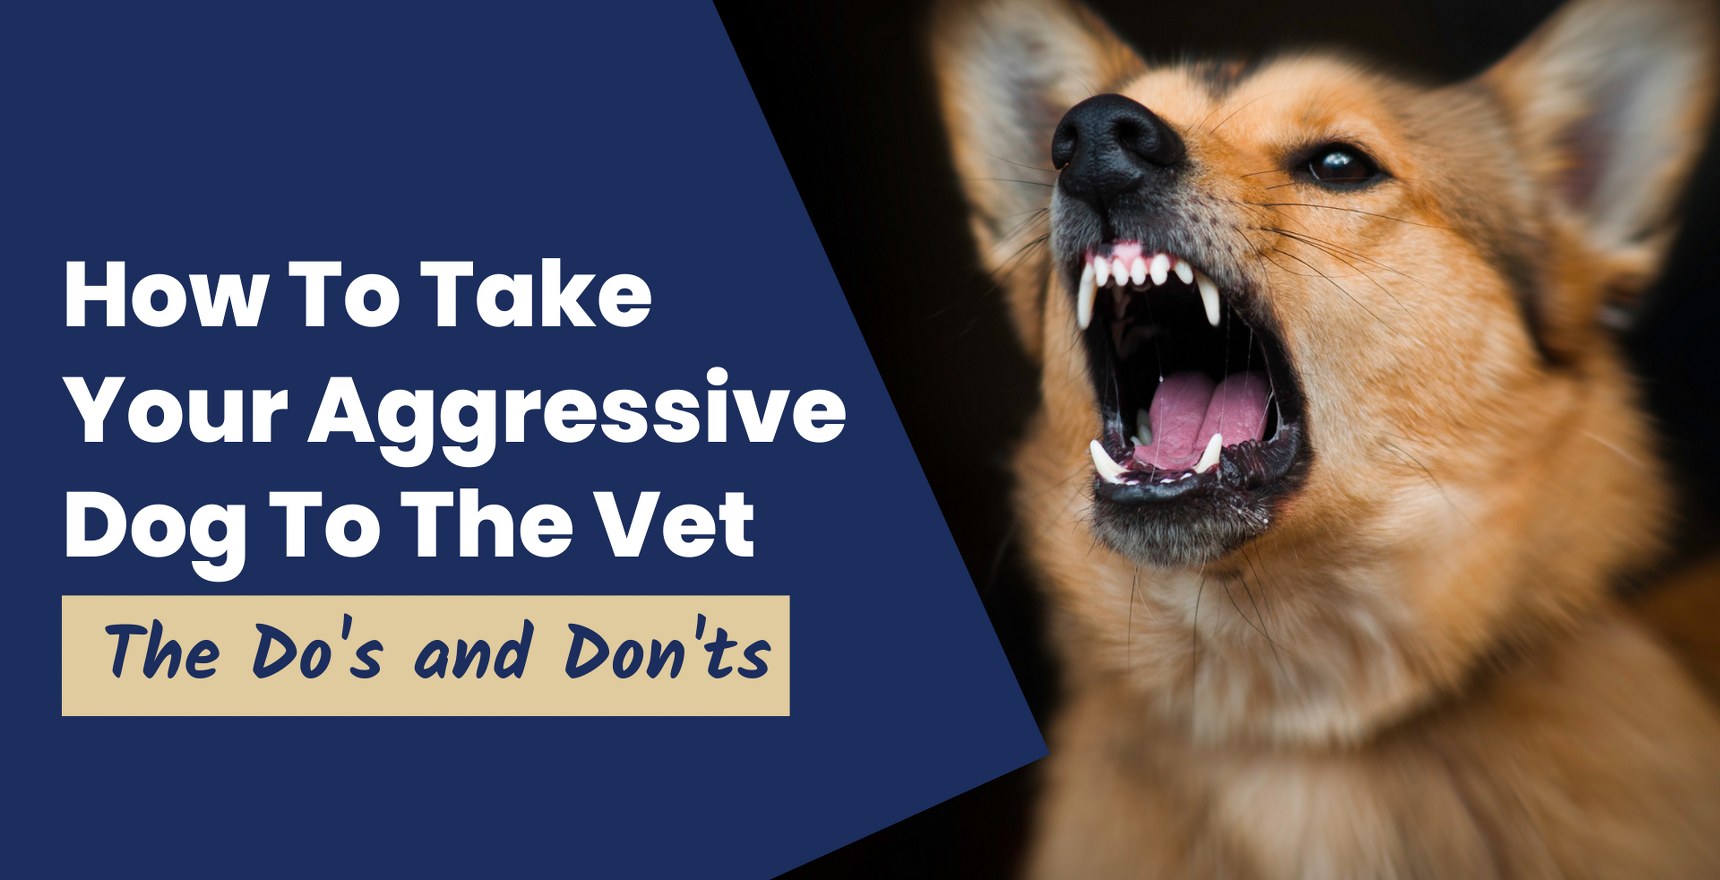 Do's and Don'ts When Taking An Aggressive Dog To The Vet